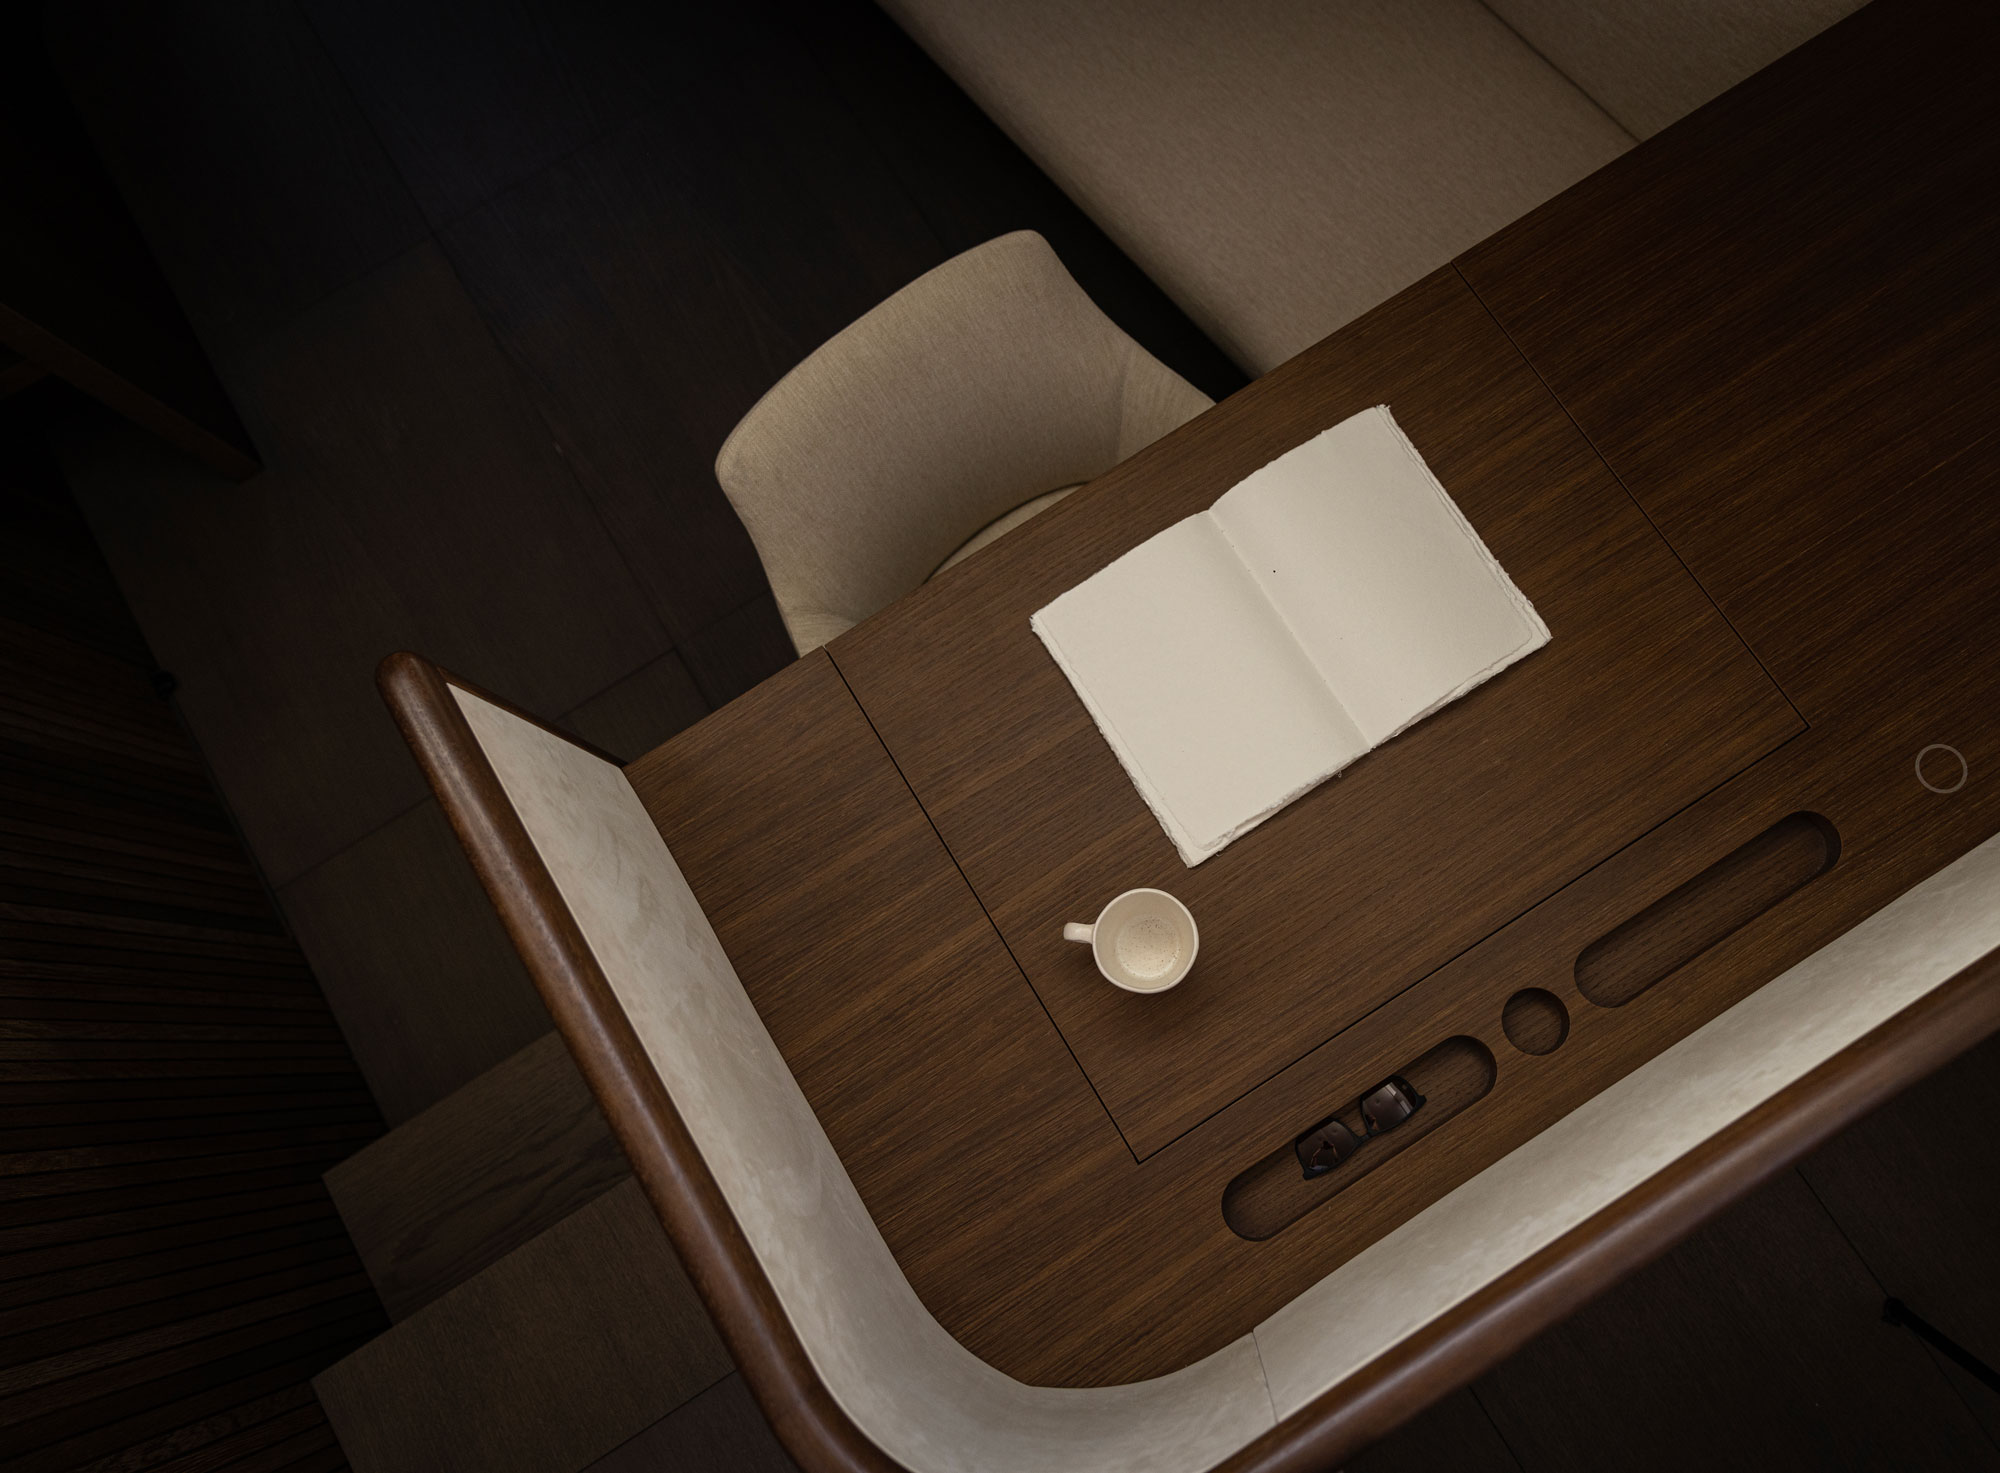 The workstation is kept simple with a room divider crafted with leather.